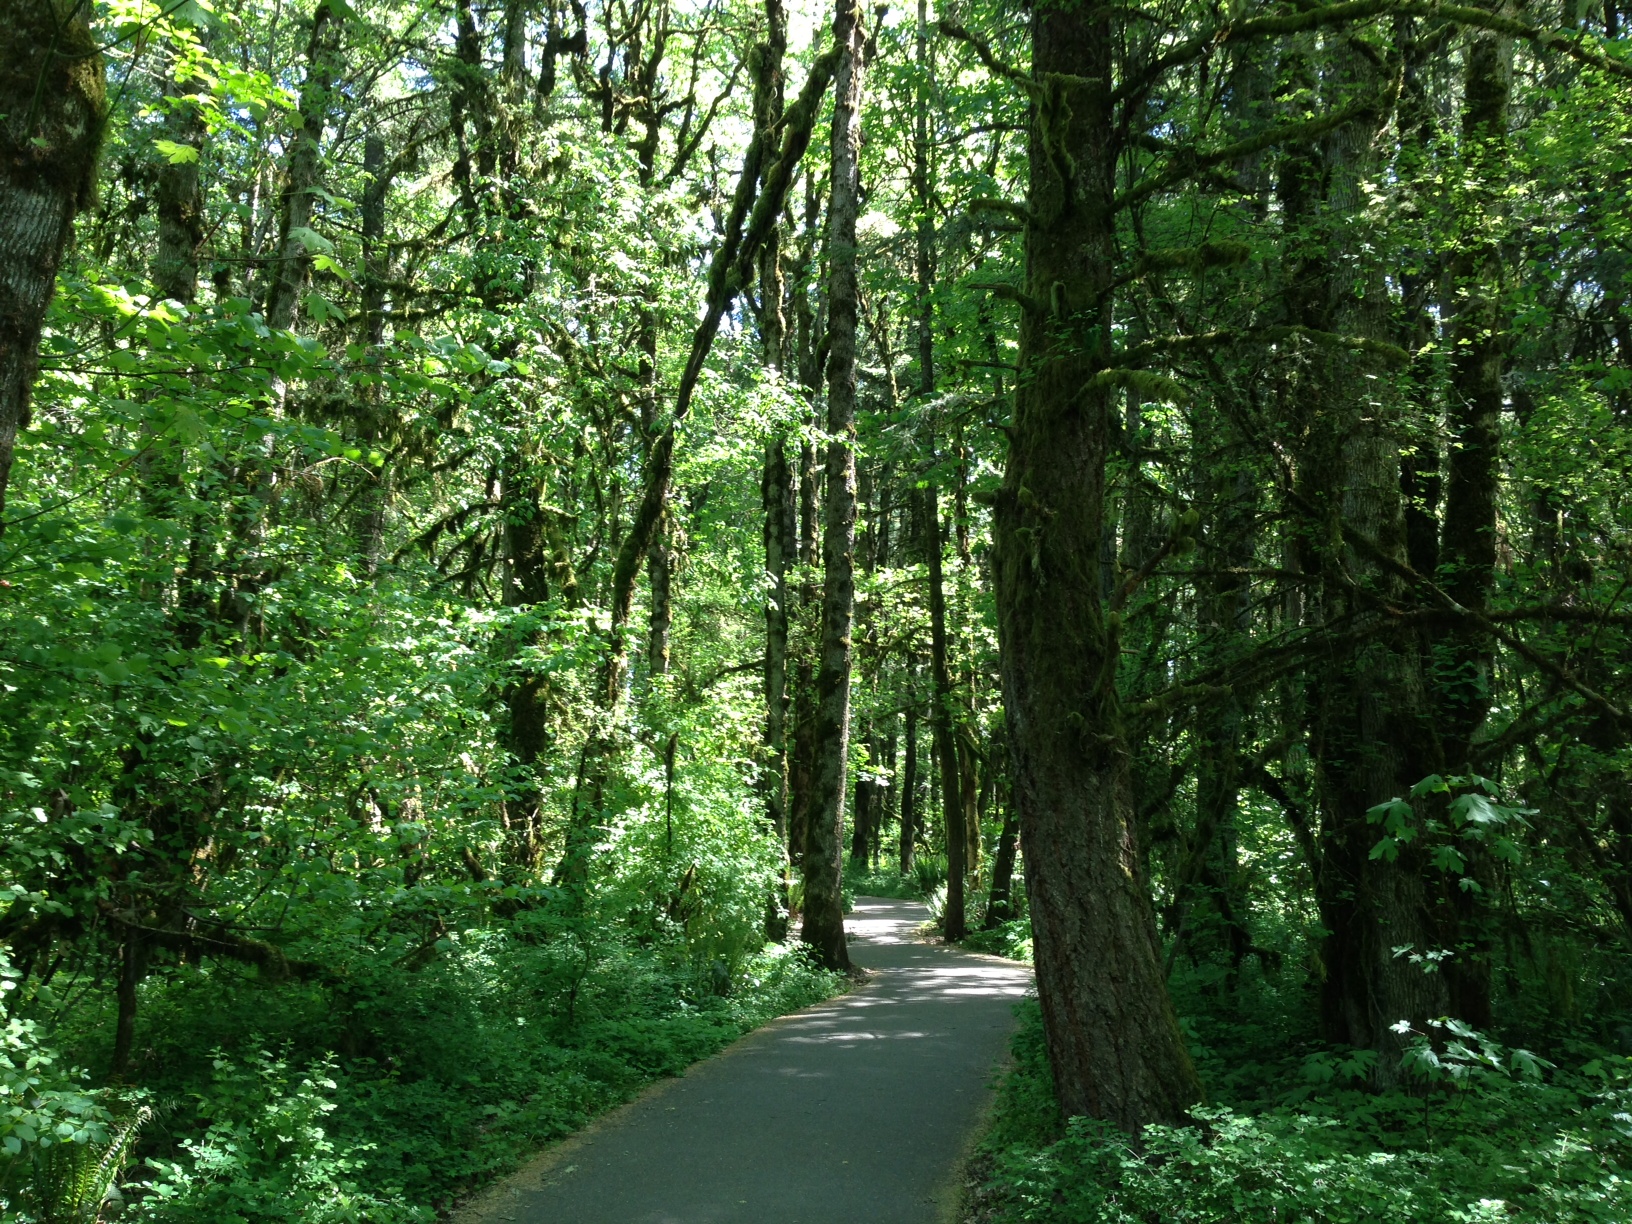 Food for Thought: The Forest for the Trees (walking to work through a